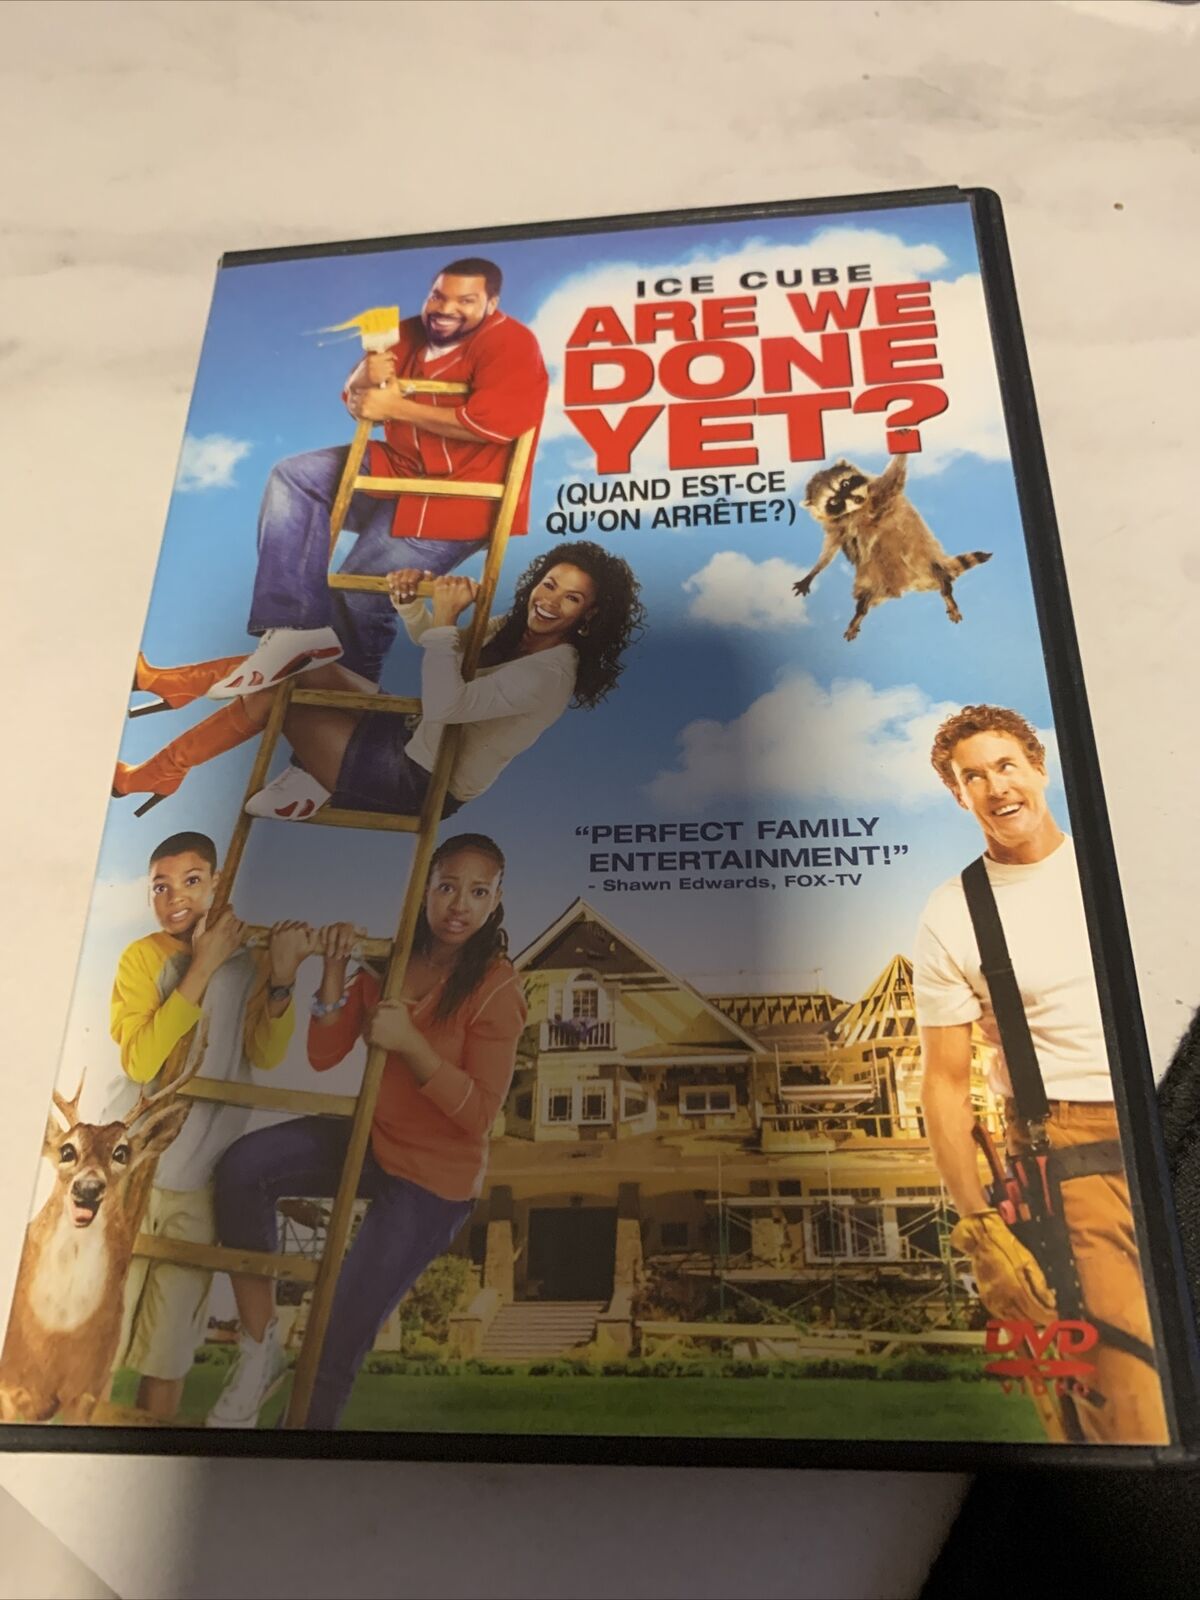 Are We Done Yet (DVD, 2007, Canadian)